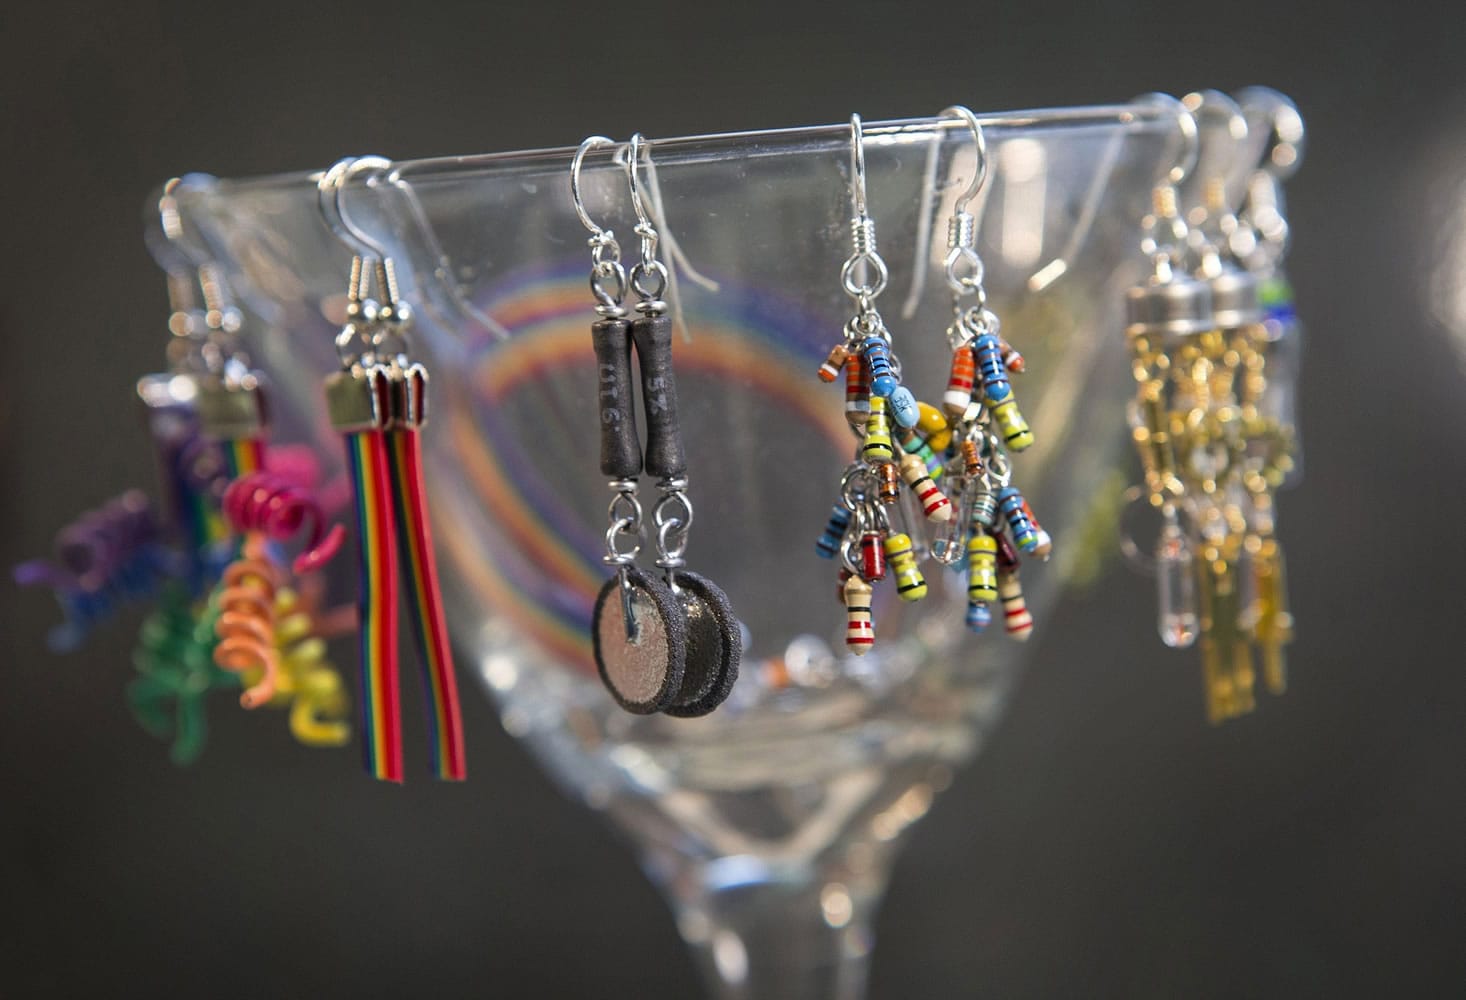 Some of the earrings made by brother and sister team Steve and Susan Grzadzielewski and Steve's daughter, Claire Montgomery.